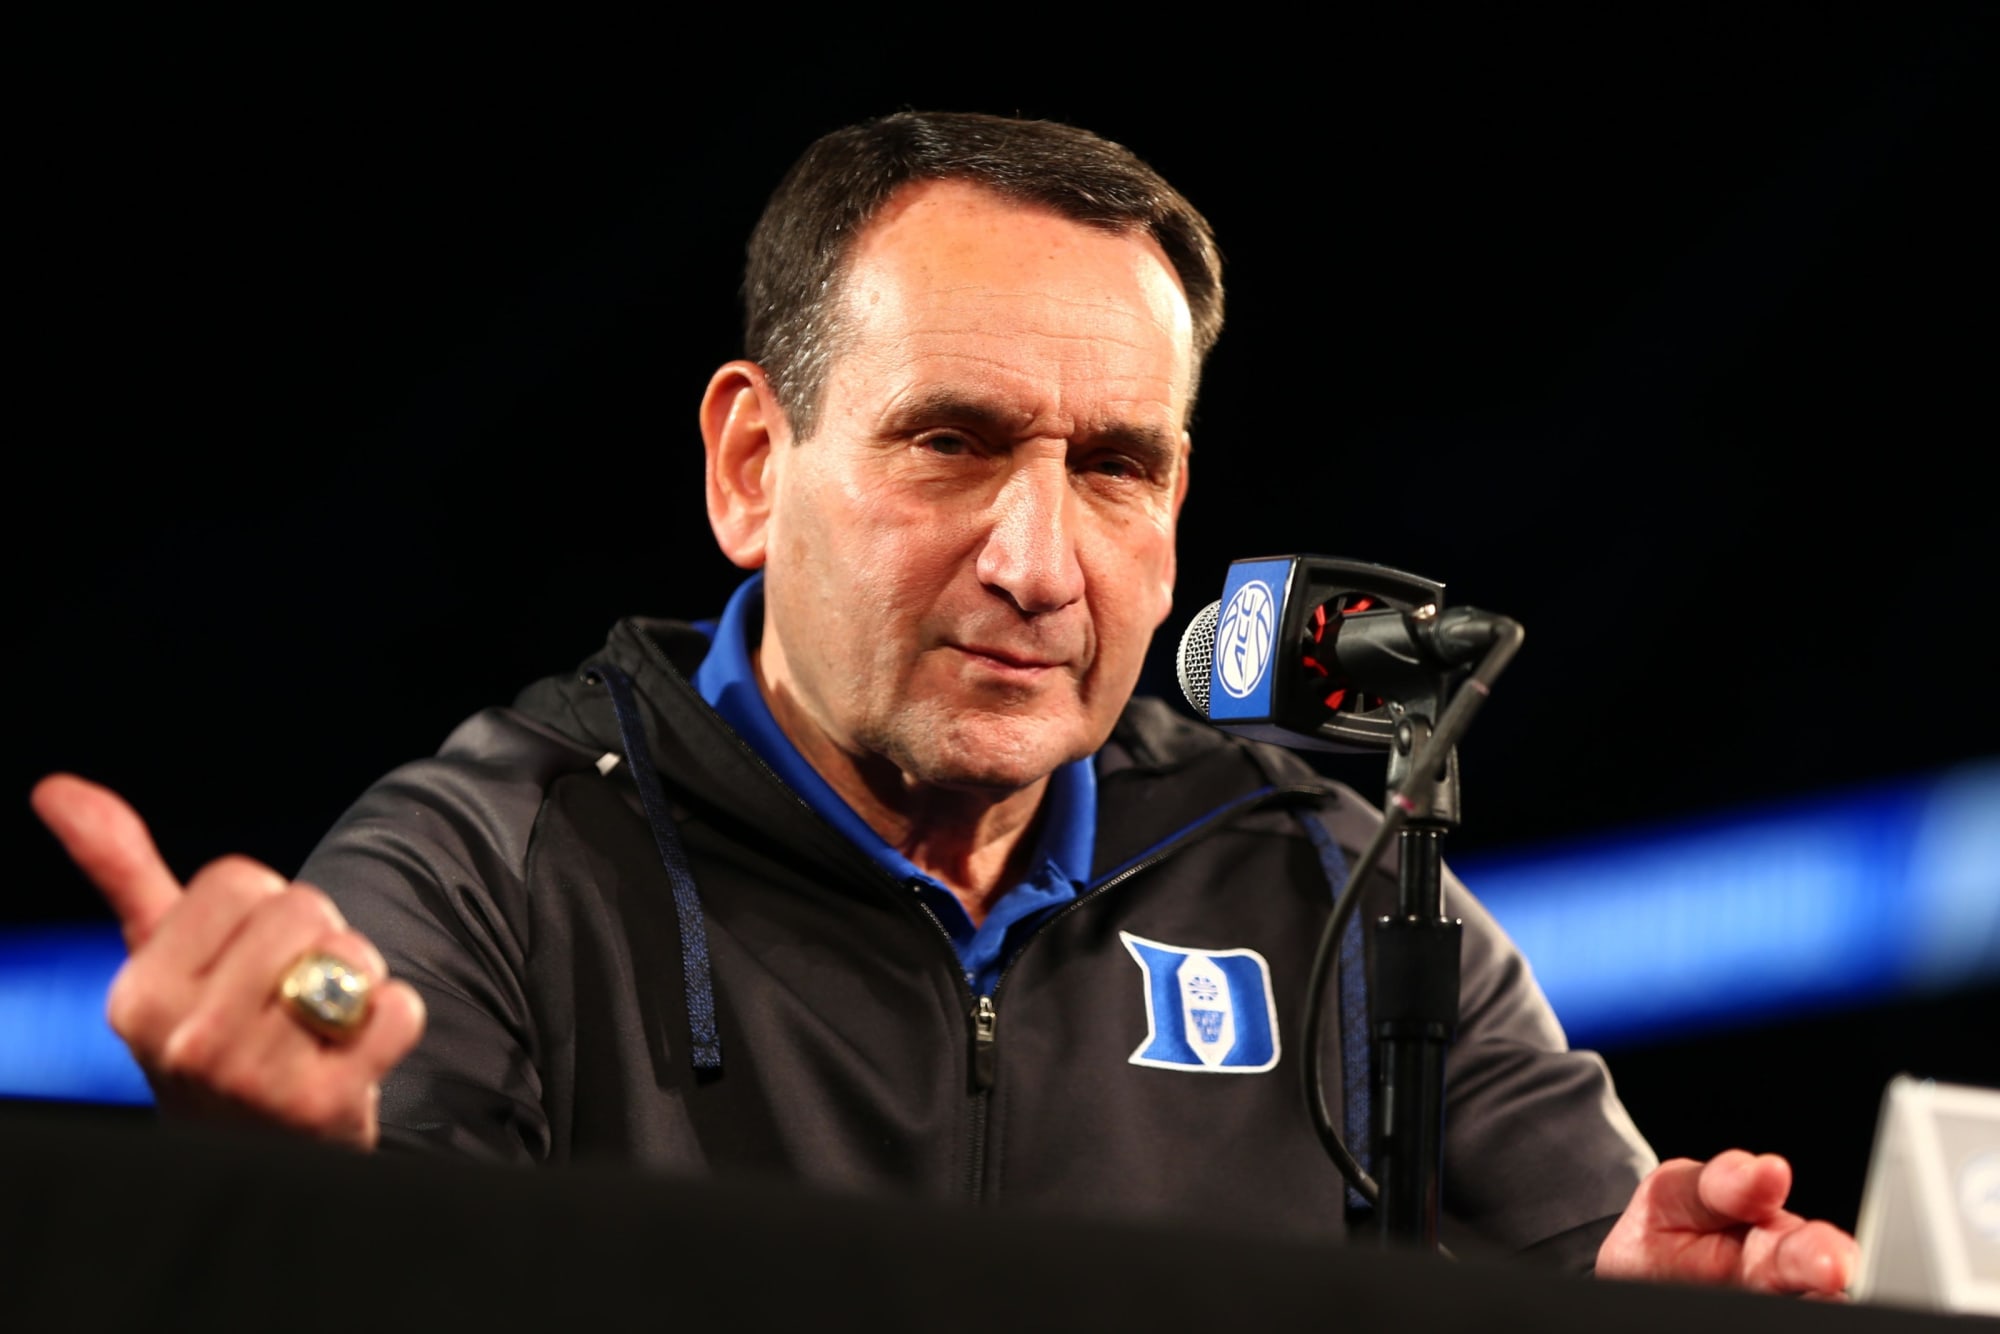 Coach K ignores two players too often